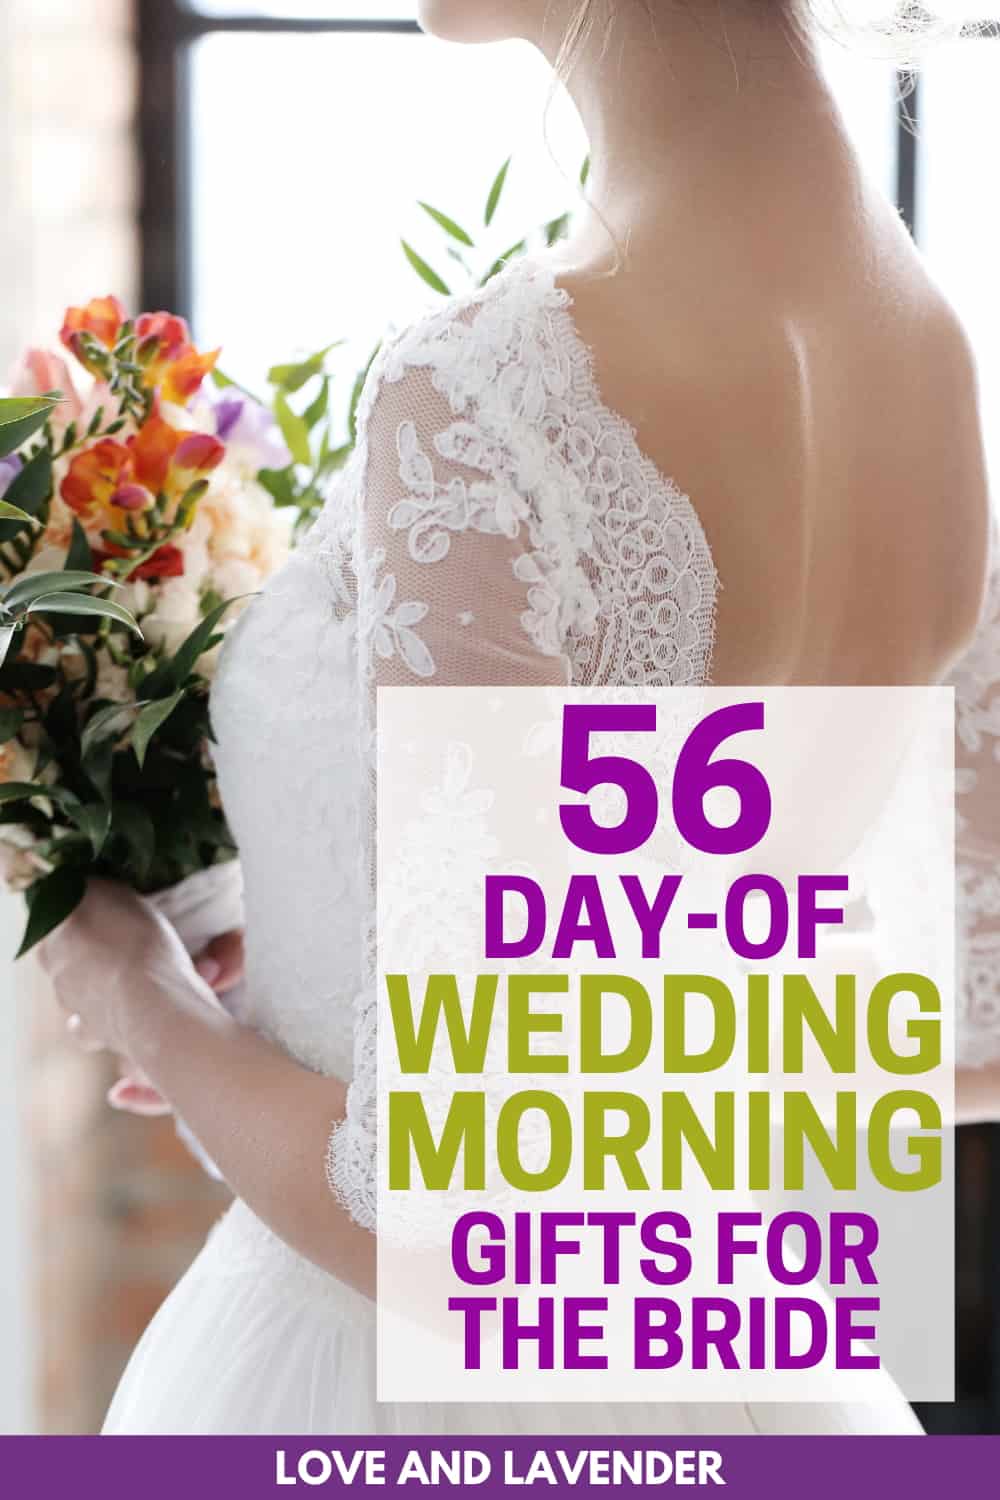 pinterest pin - wedding morning gifts for bride